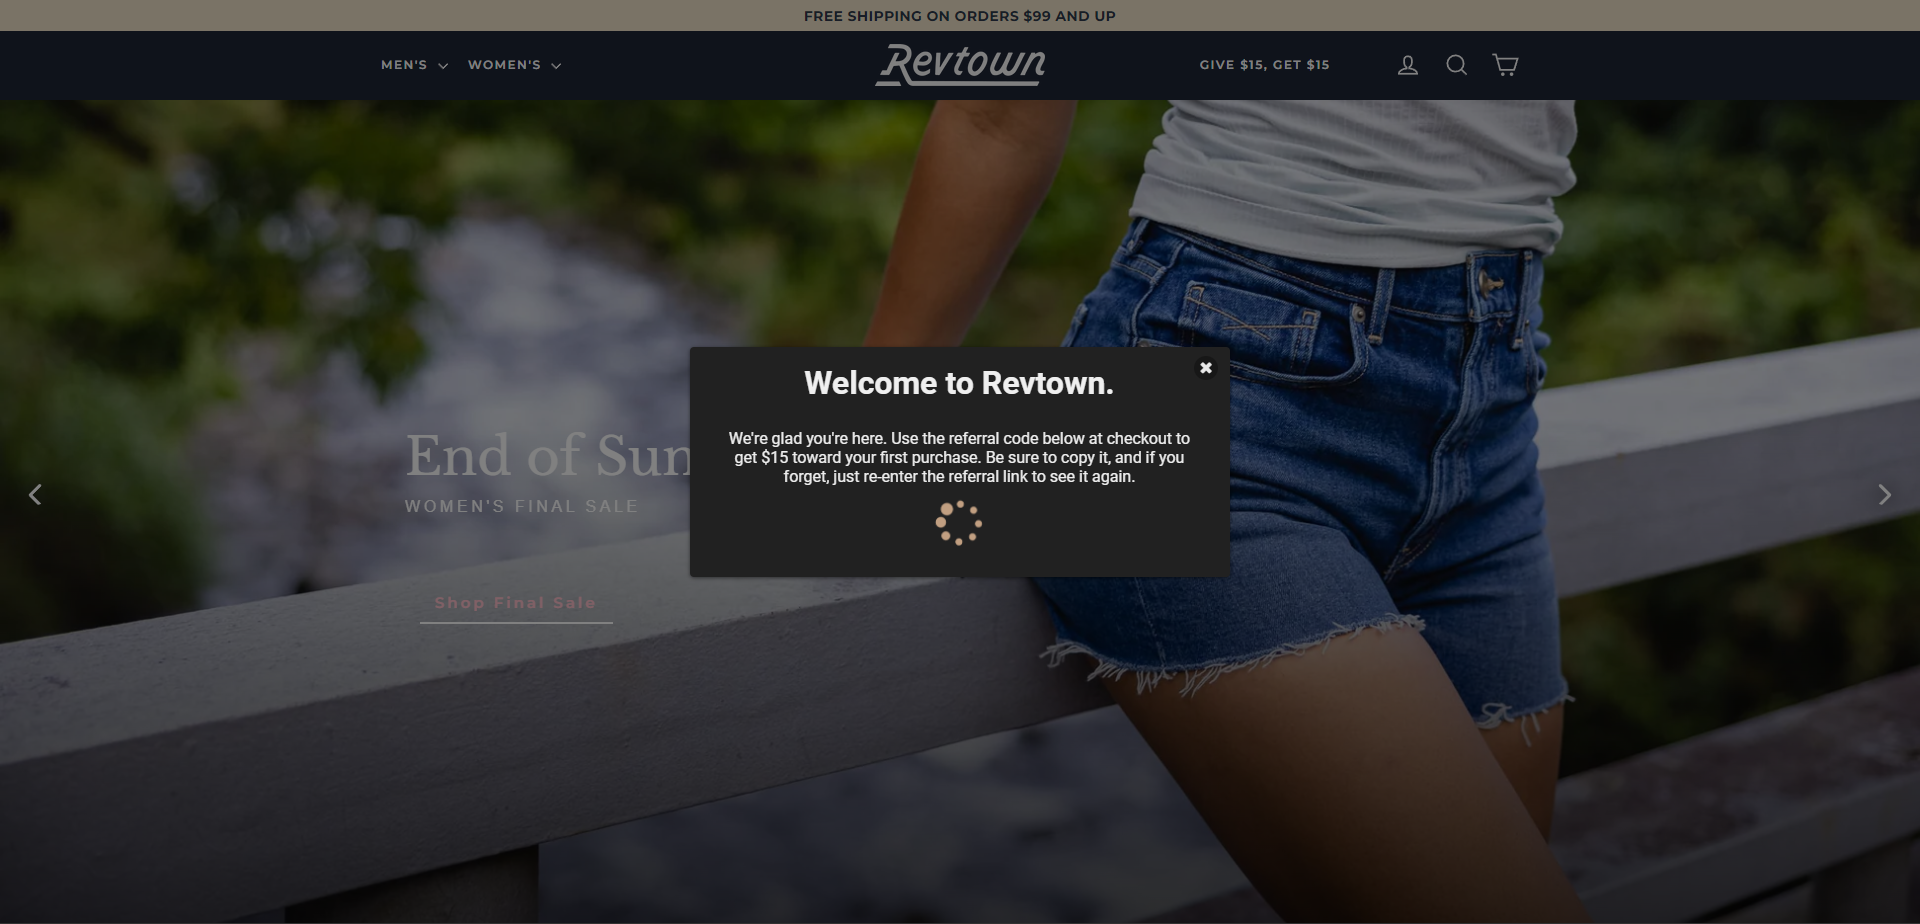 Referral Landing Page for Revtown